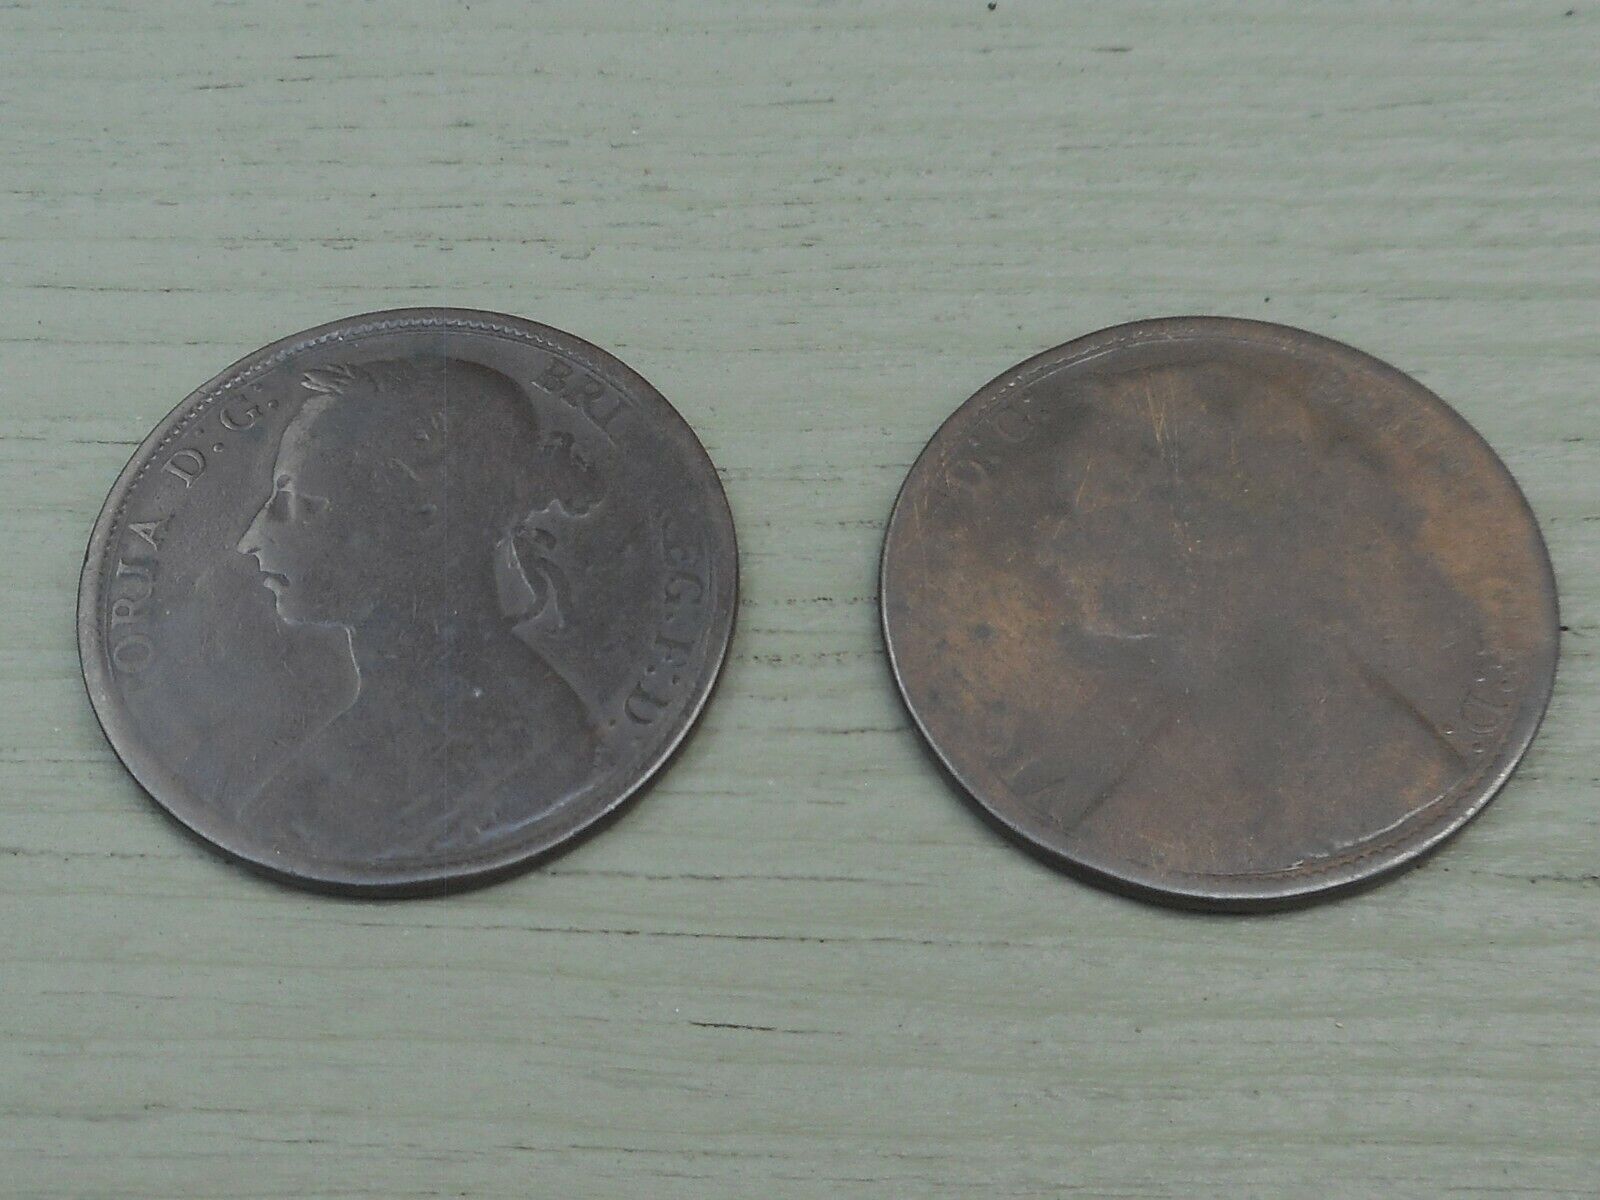 1877 & 1890 LOT OF 2 COINS BRITAIN One Penny 1 Pence Cent Queen Victoria Без бренда - фотография #6